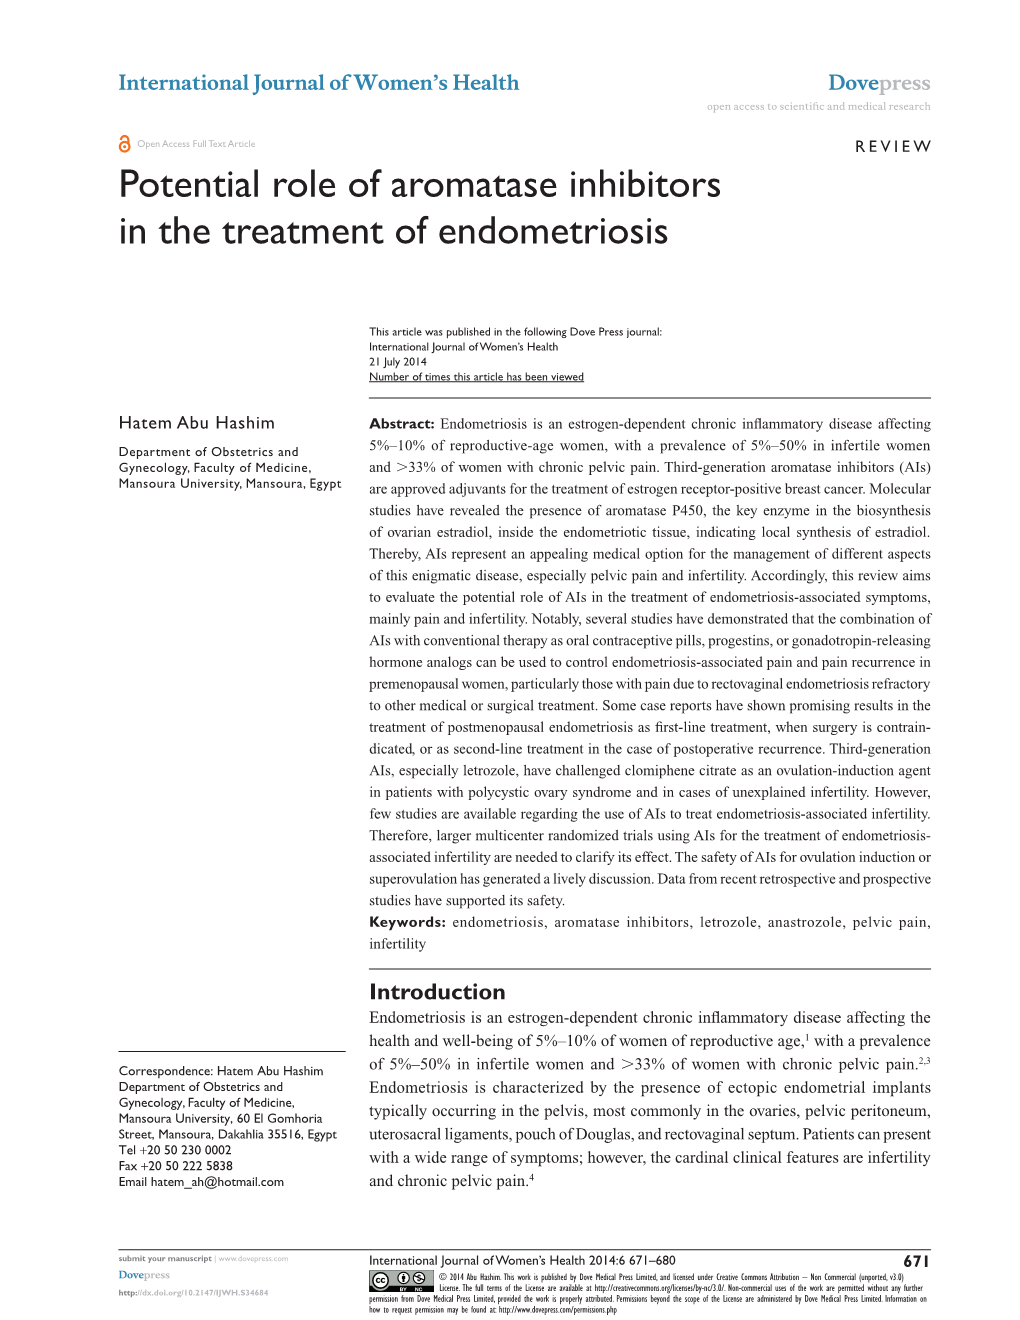 Potential Role of Aromatase Inhibitors in the Treatment of Endometriosis